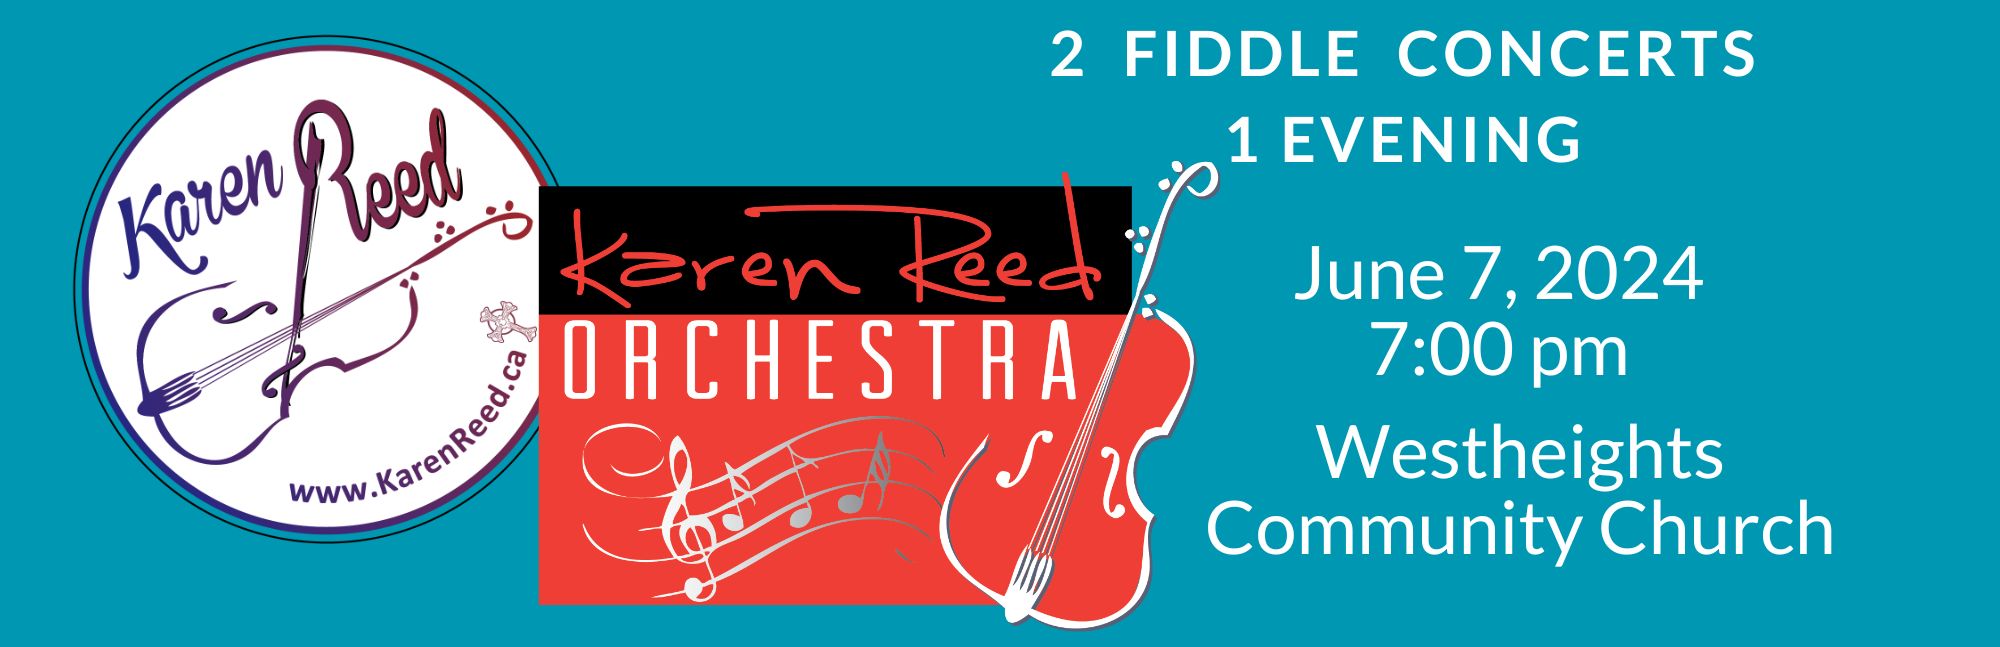 2 Fiddle Concerts: One Evening